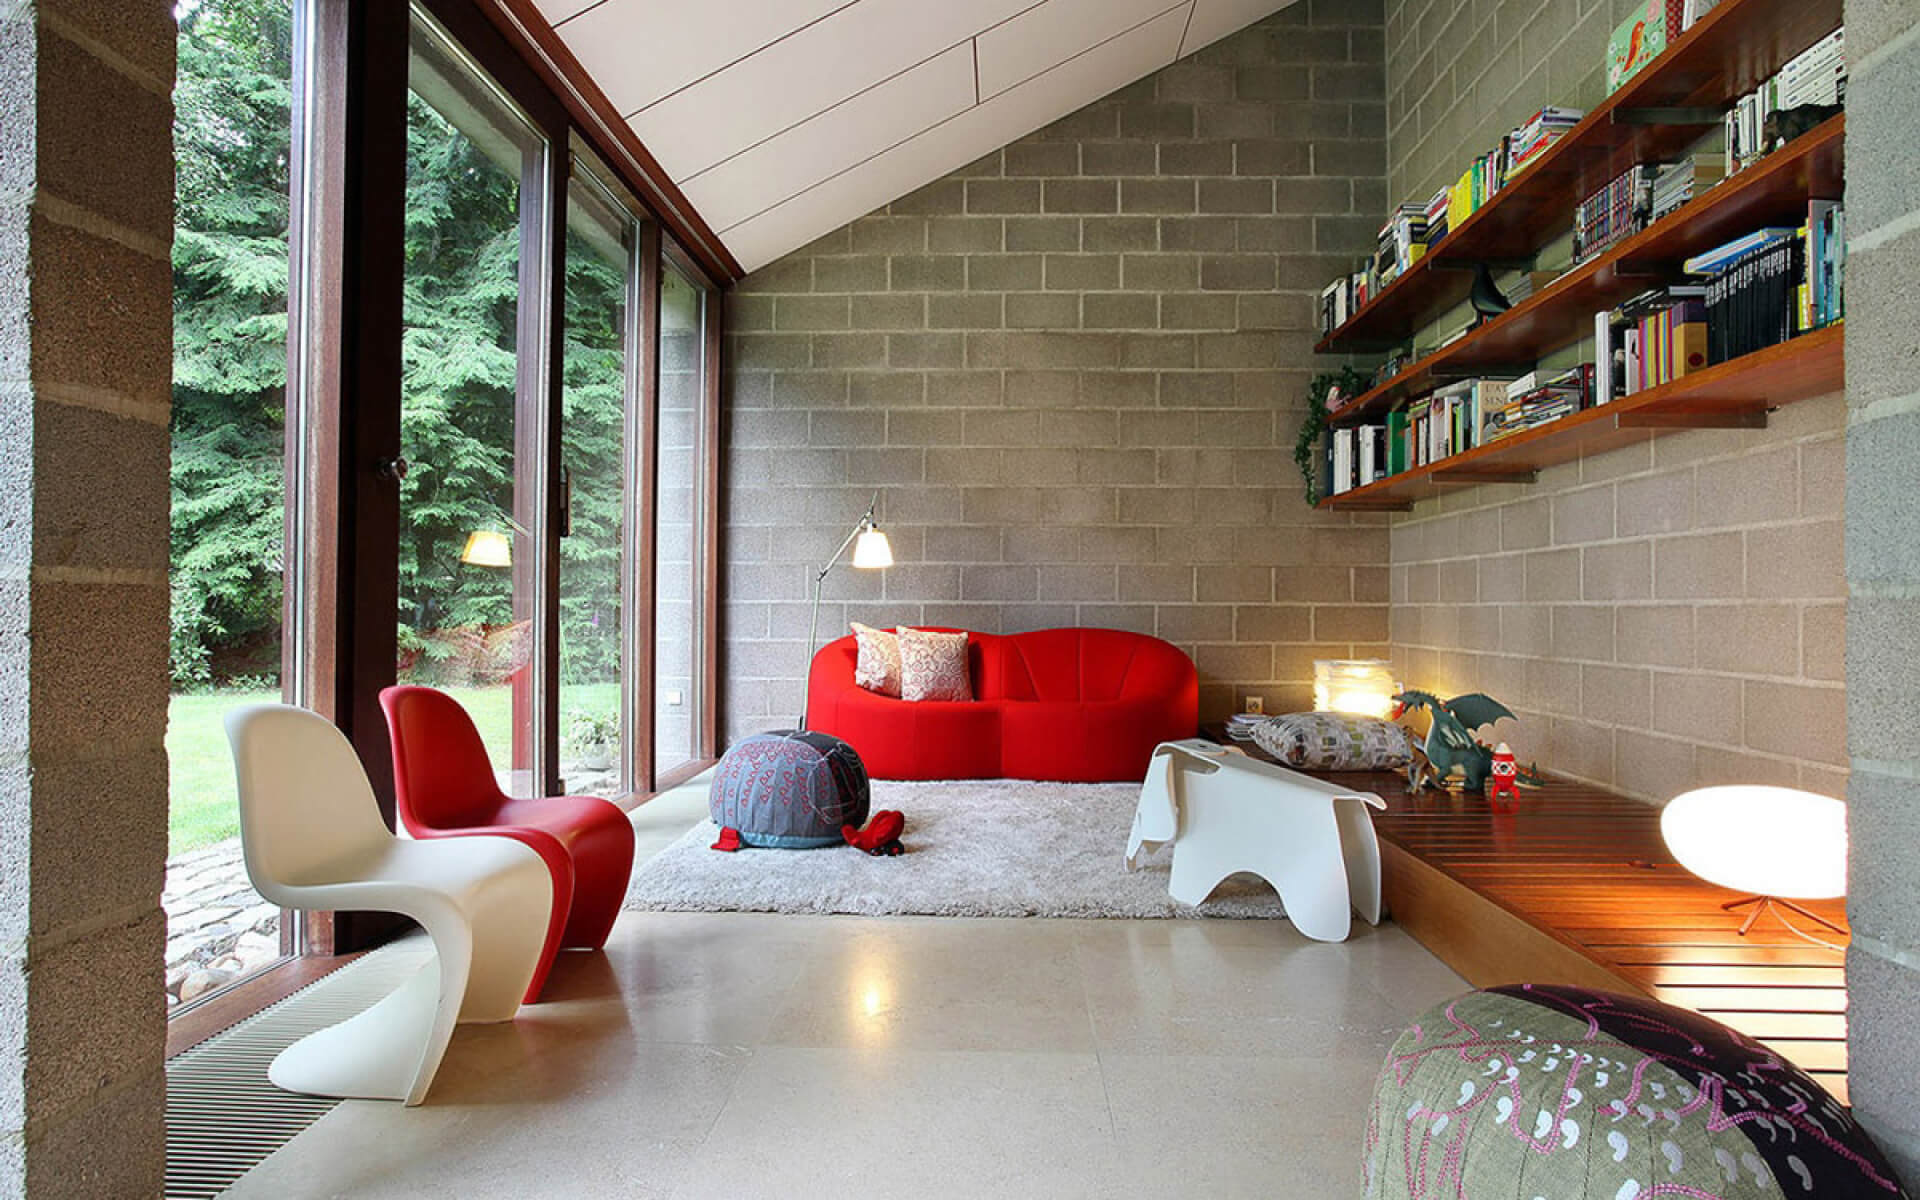 Cozy reading and relaxing corner of a home in modern style.